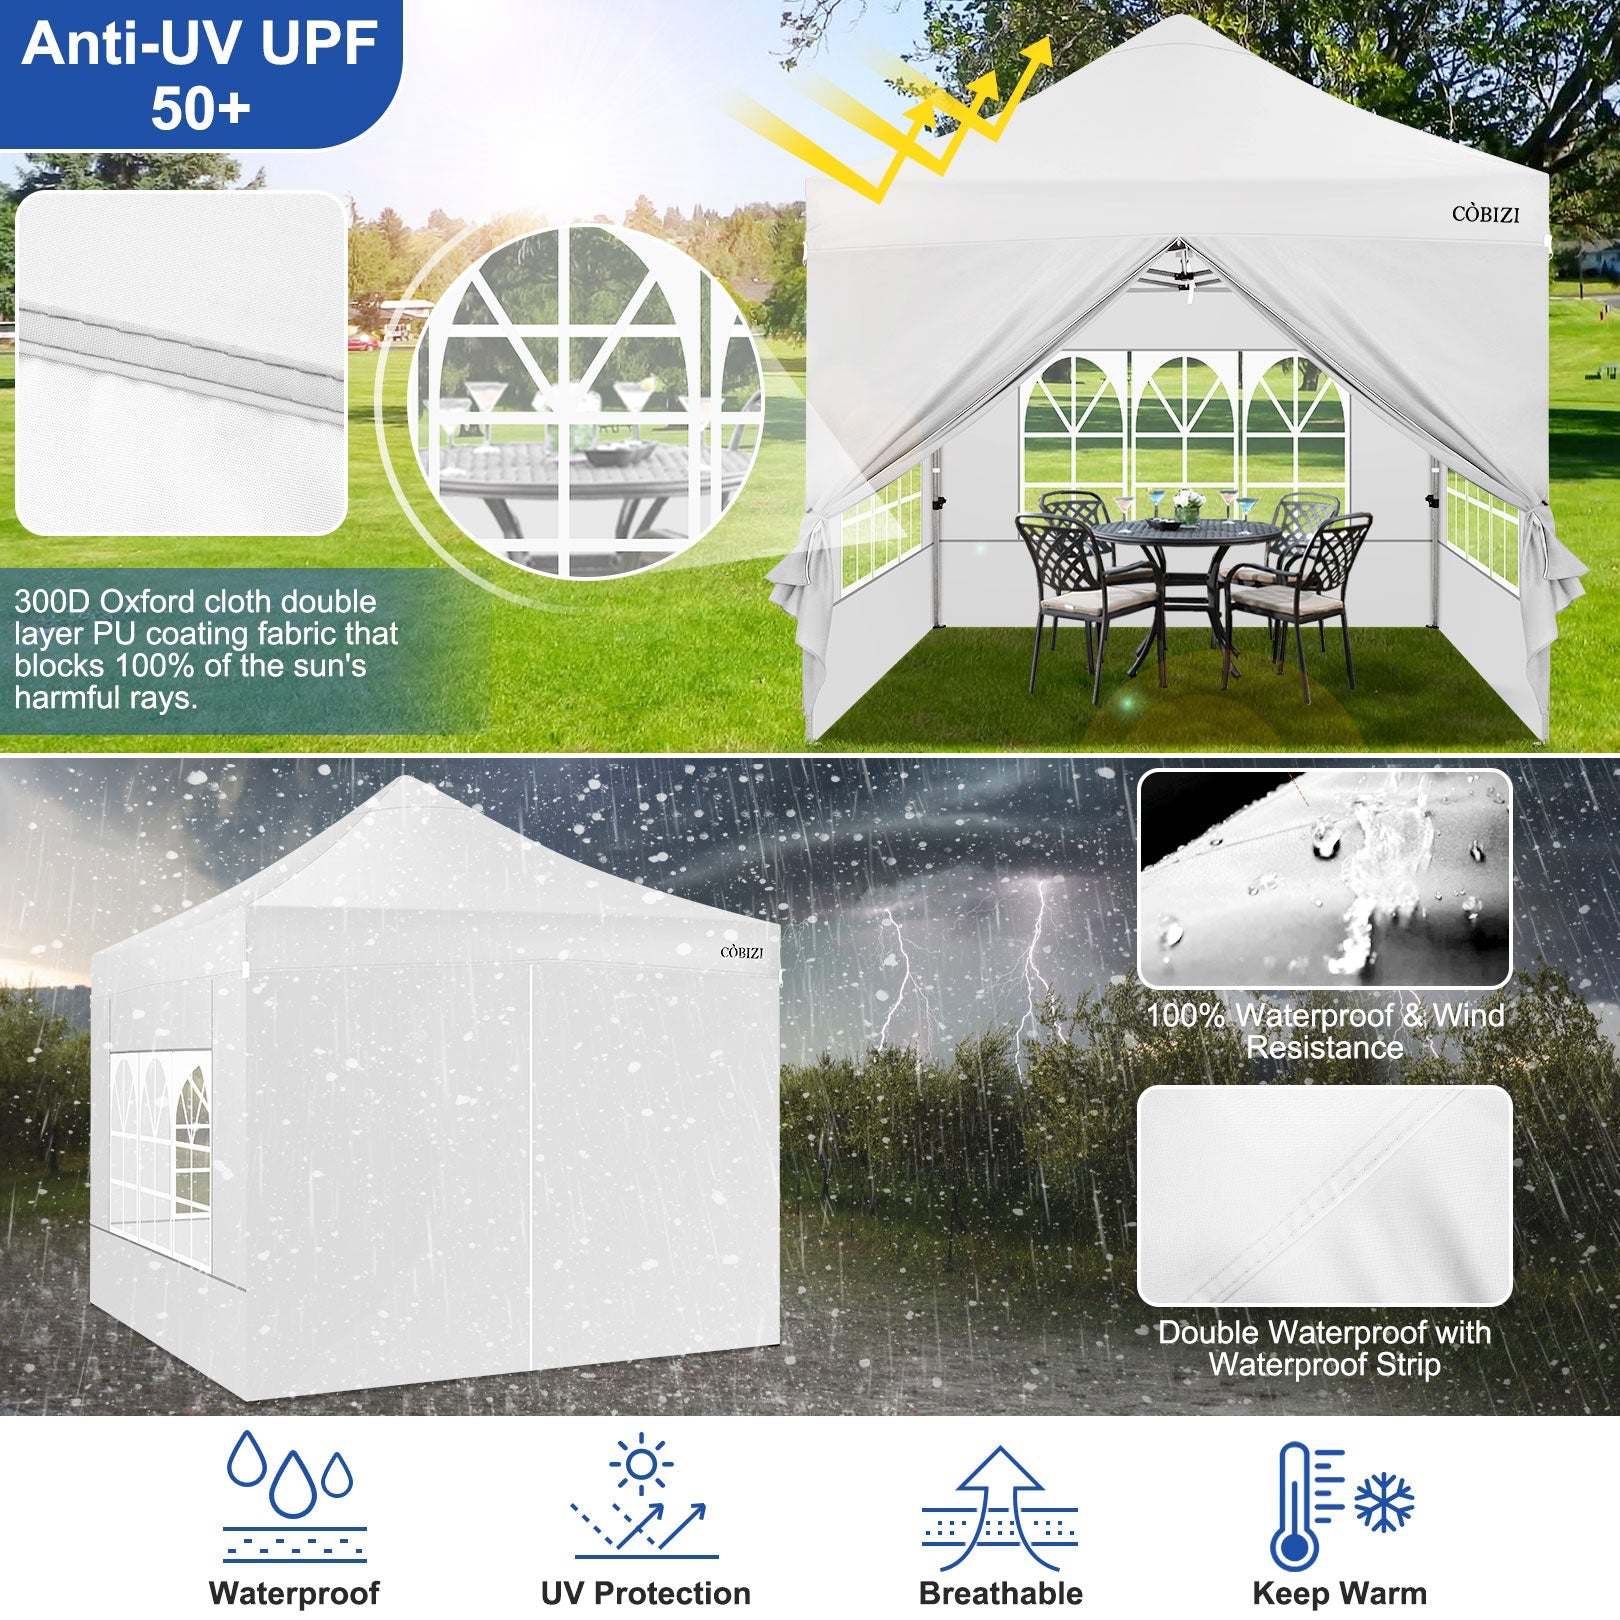 10 x 10ft Pop Up Canopy Tent Instant Outdoor Party Heavy Duty Canopy Straight Leg Commercial Gazebo Tent Shelter with 4 Removable Sidewalls, 4 Sand Bags, Roller Bag, White